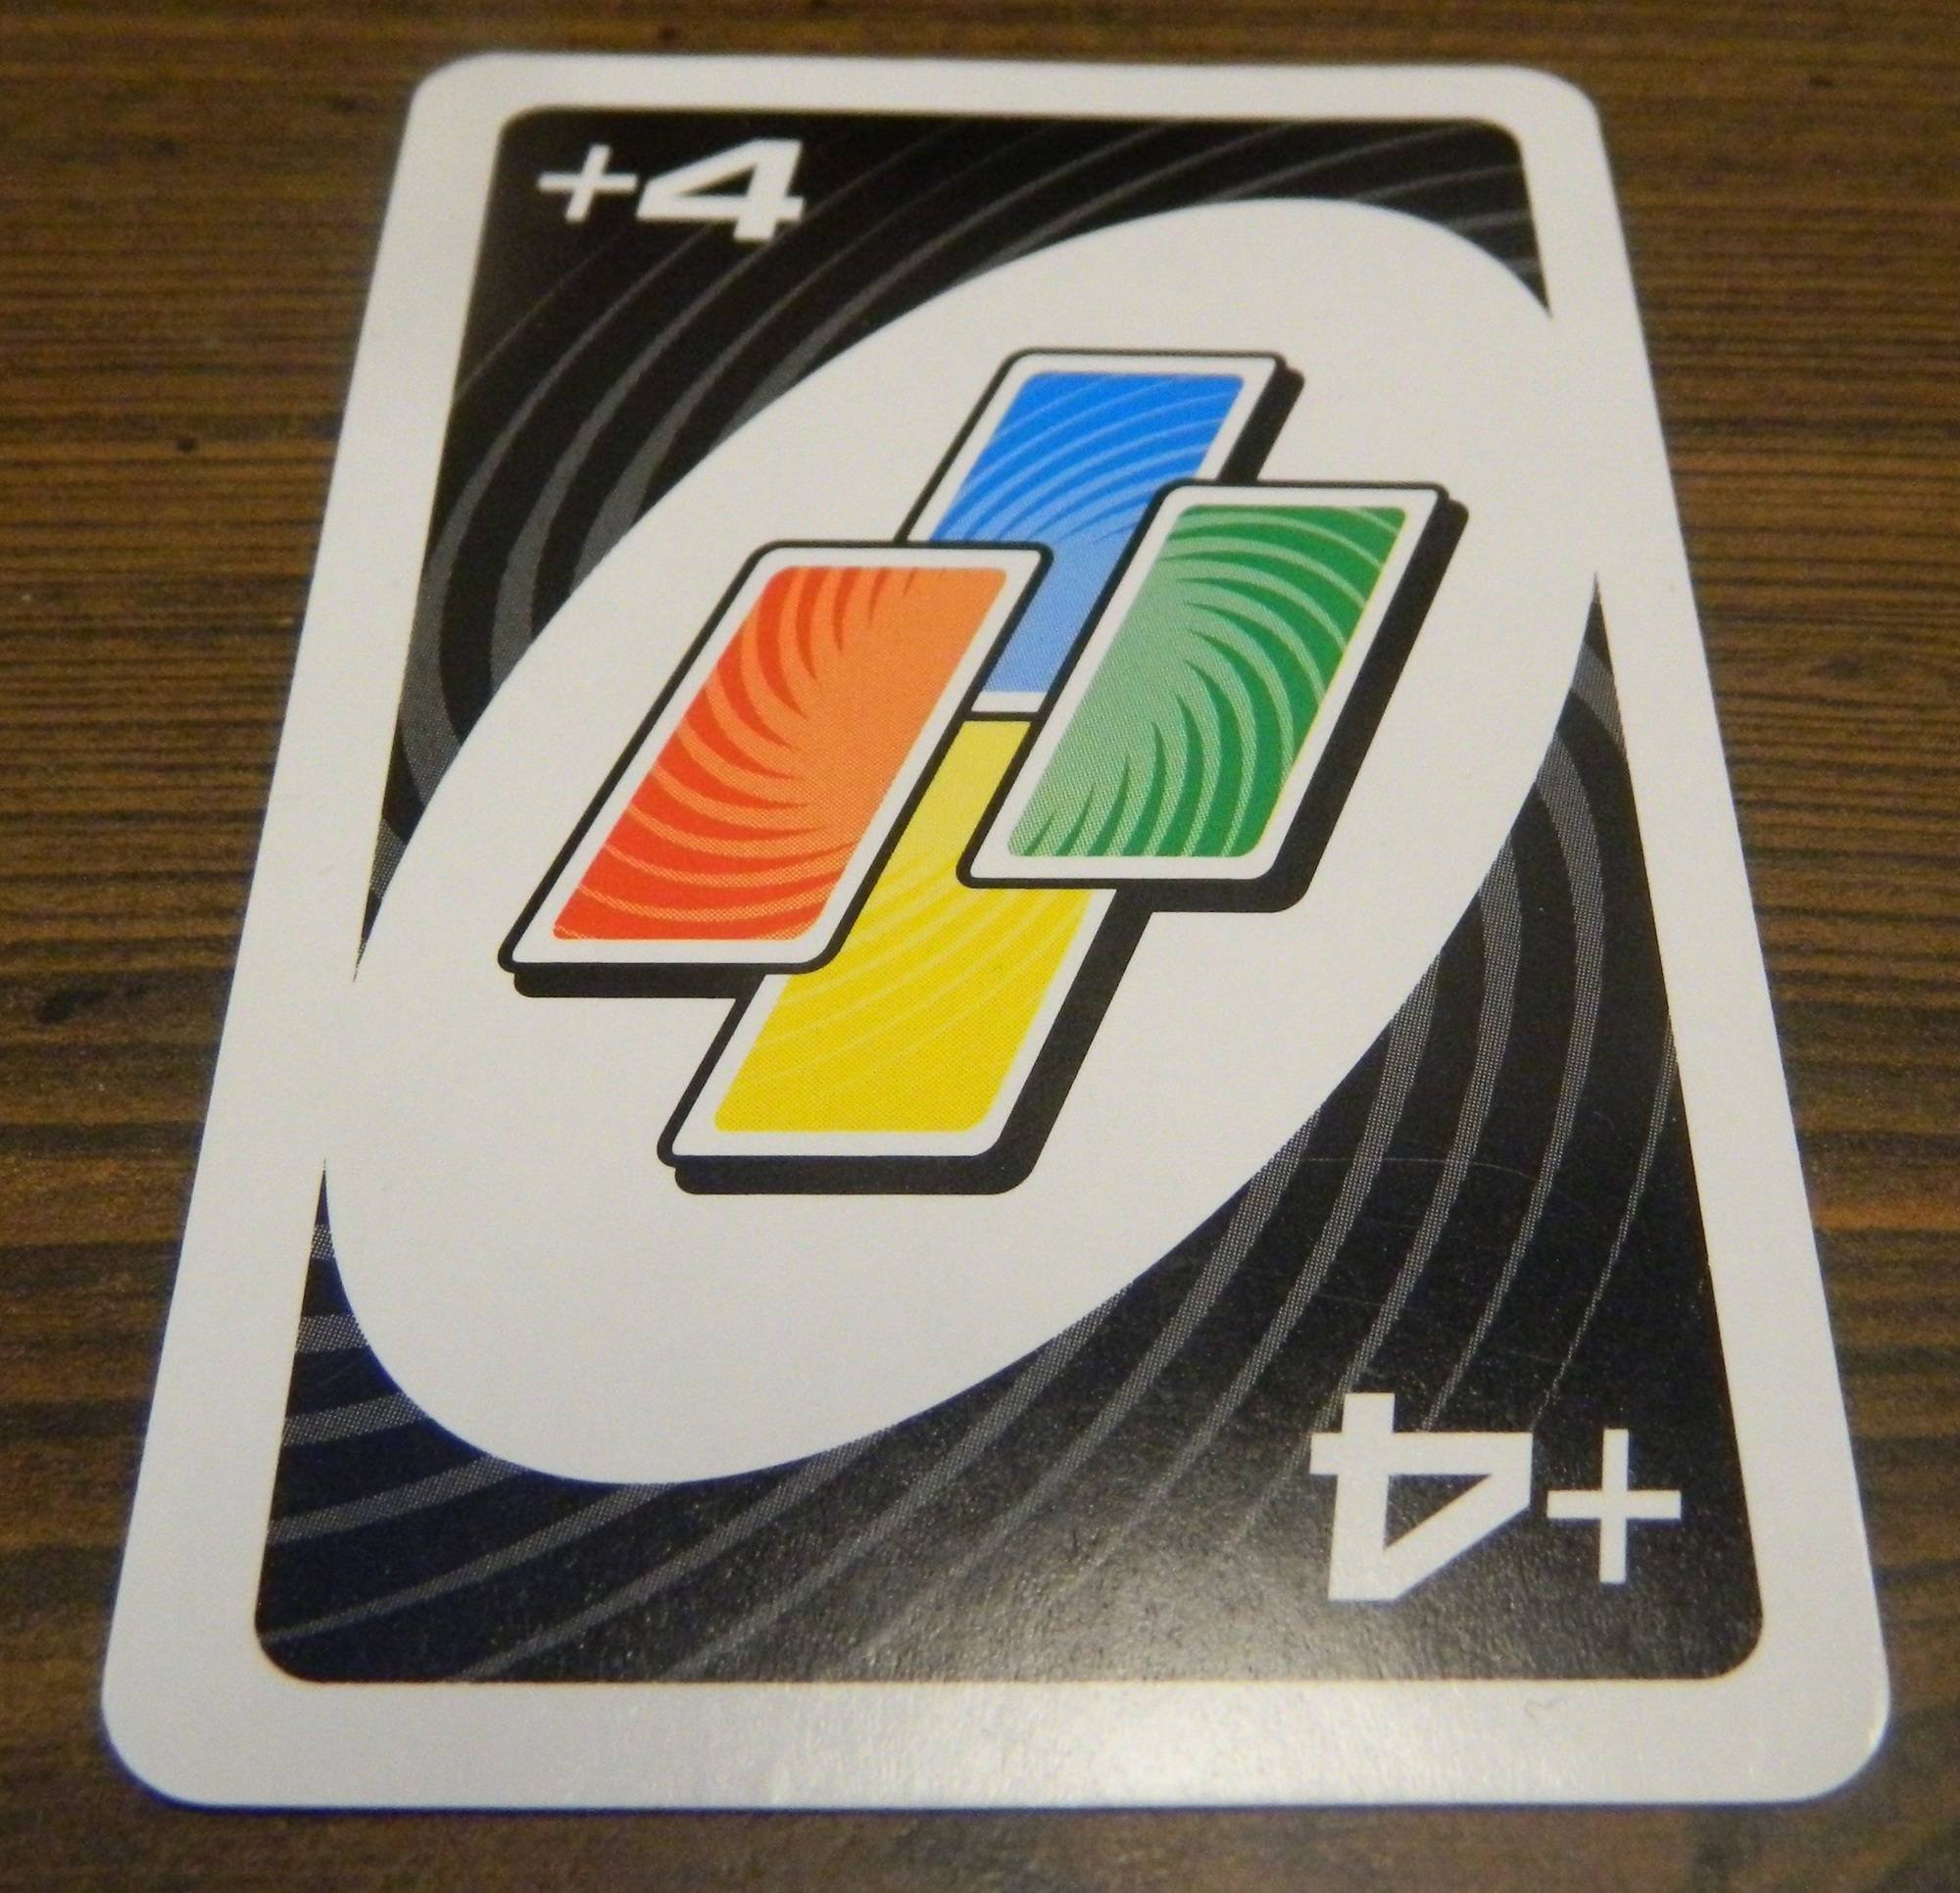 uno-confirmed-you-can-actually-end-the-game-with-an-action-card-this